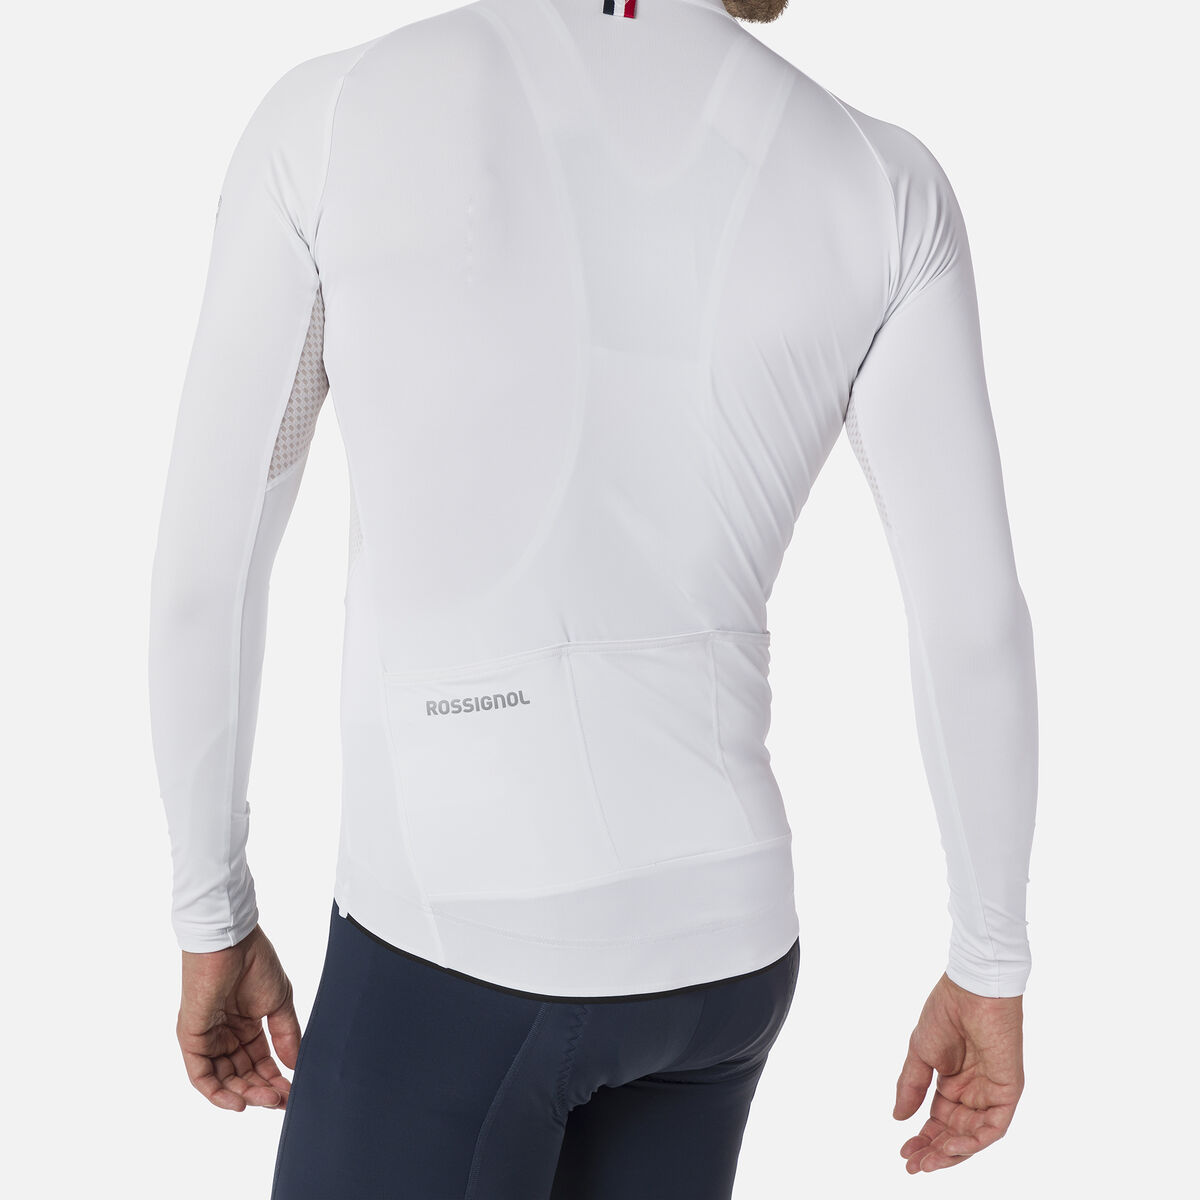 Rossignol Men's Cycling Jersey white